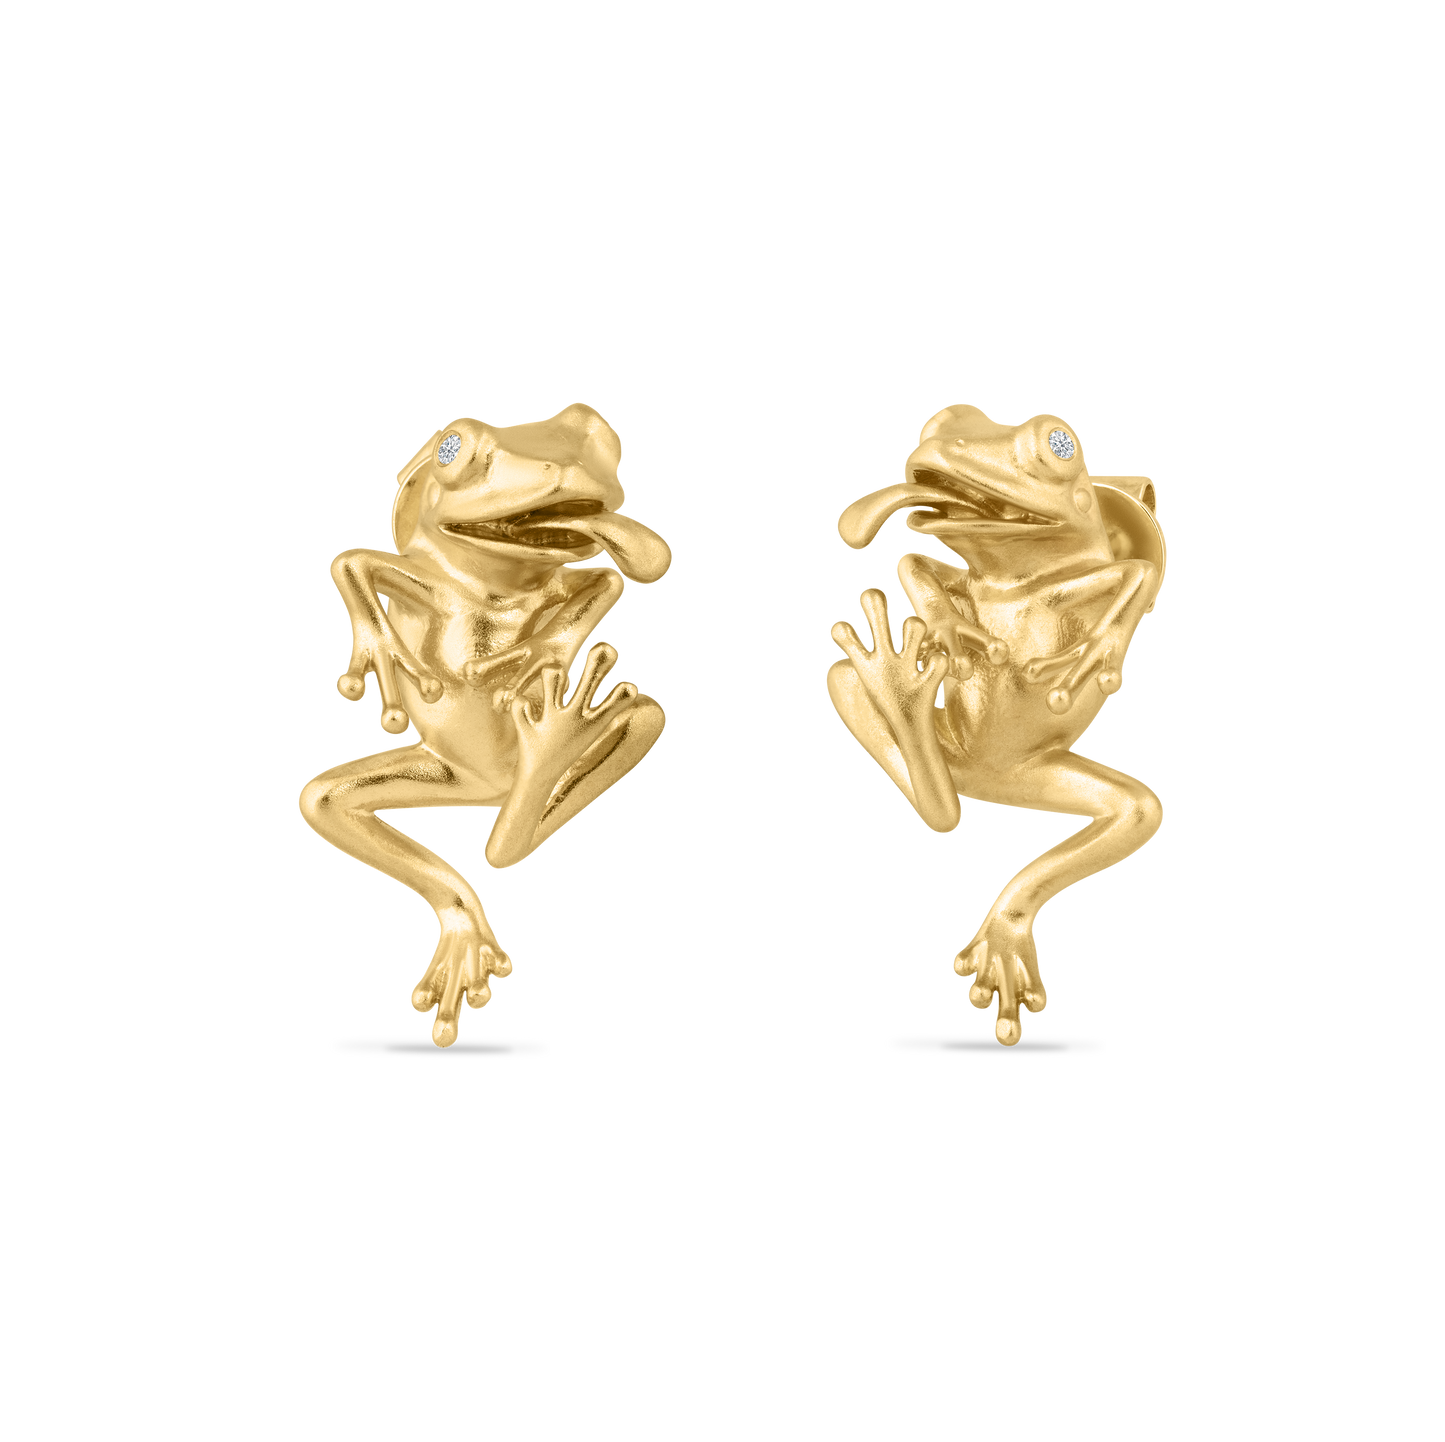 14K FROG EARRINGS WITH 4 DIAMONDS IN EYES 0.02CT WITH POSTS